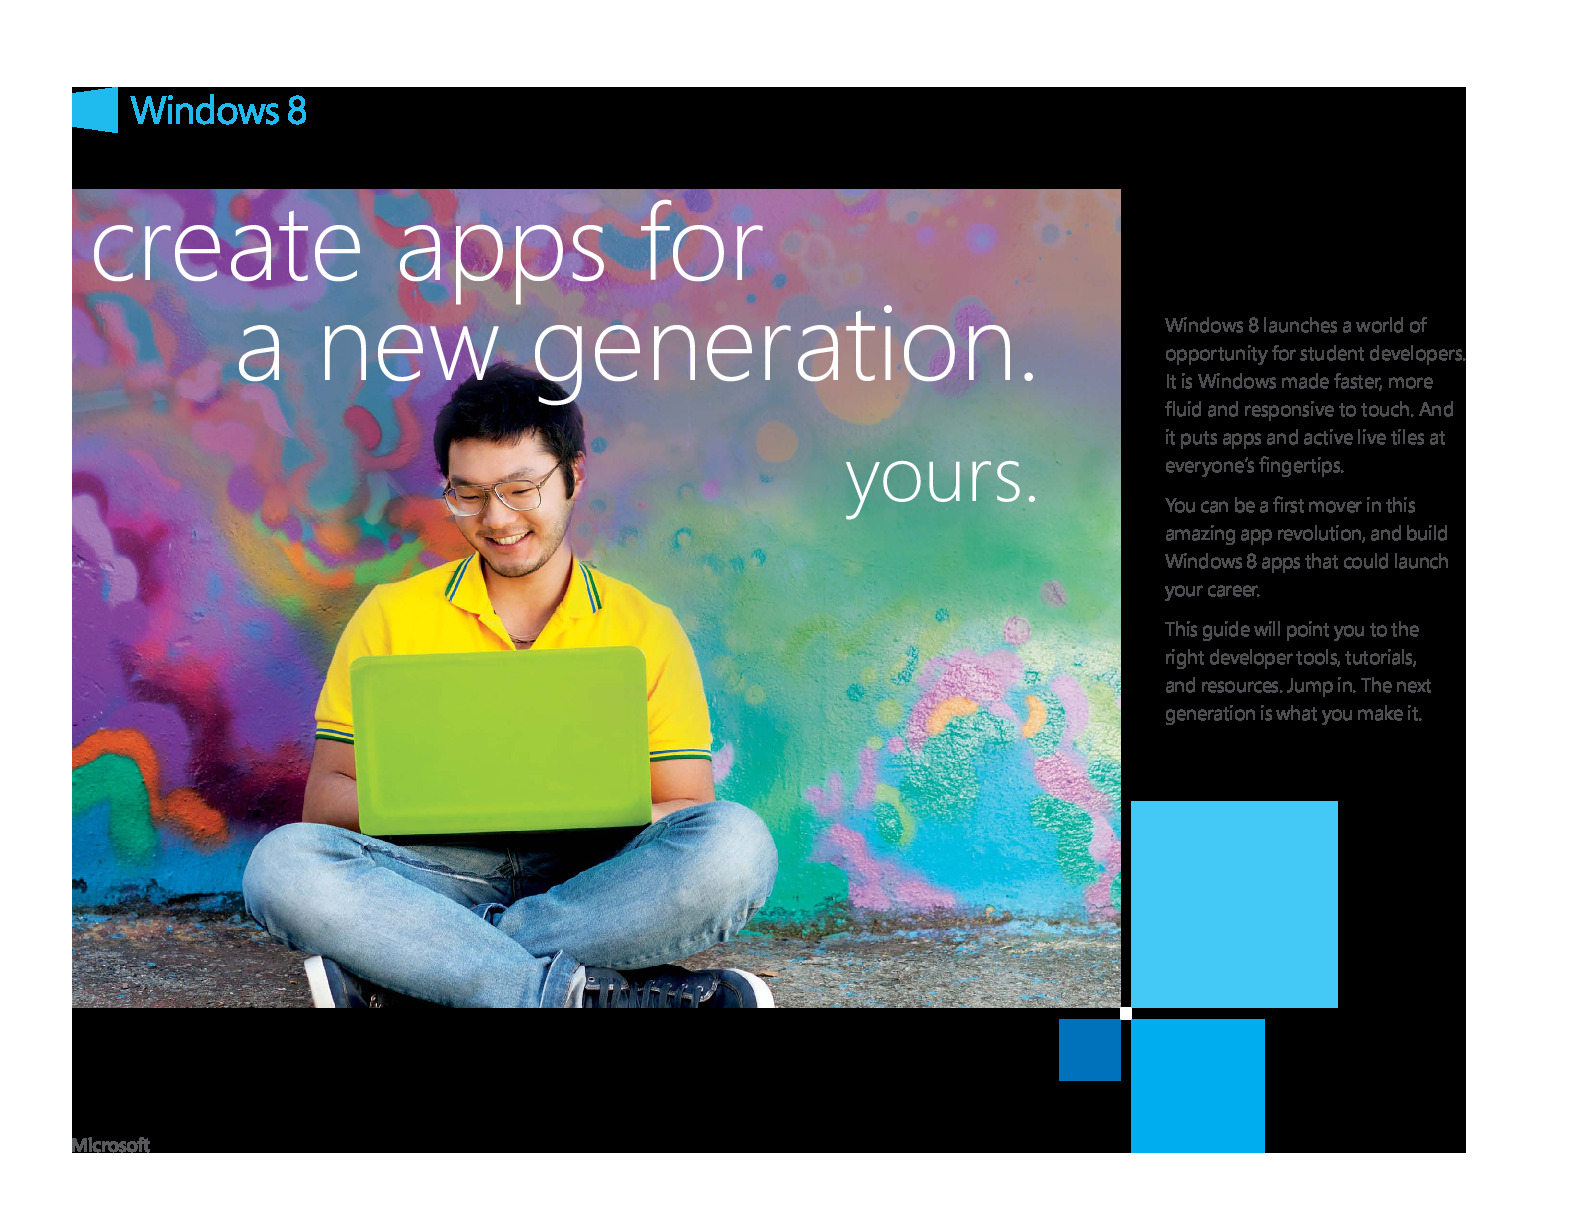 Dev_Windows_8_apps_Getting_Started_Guide